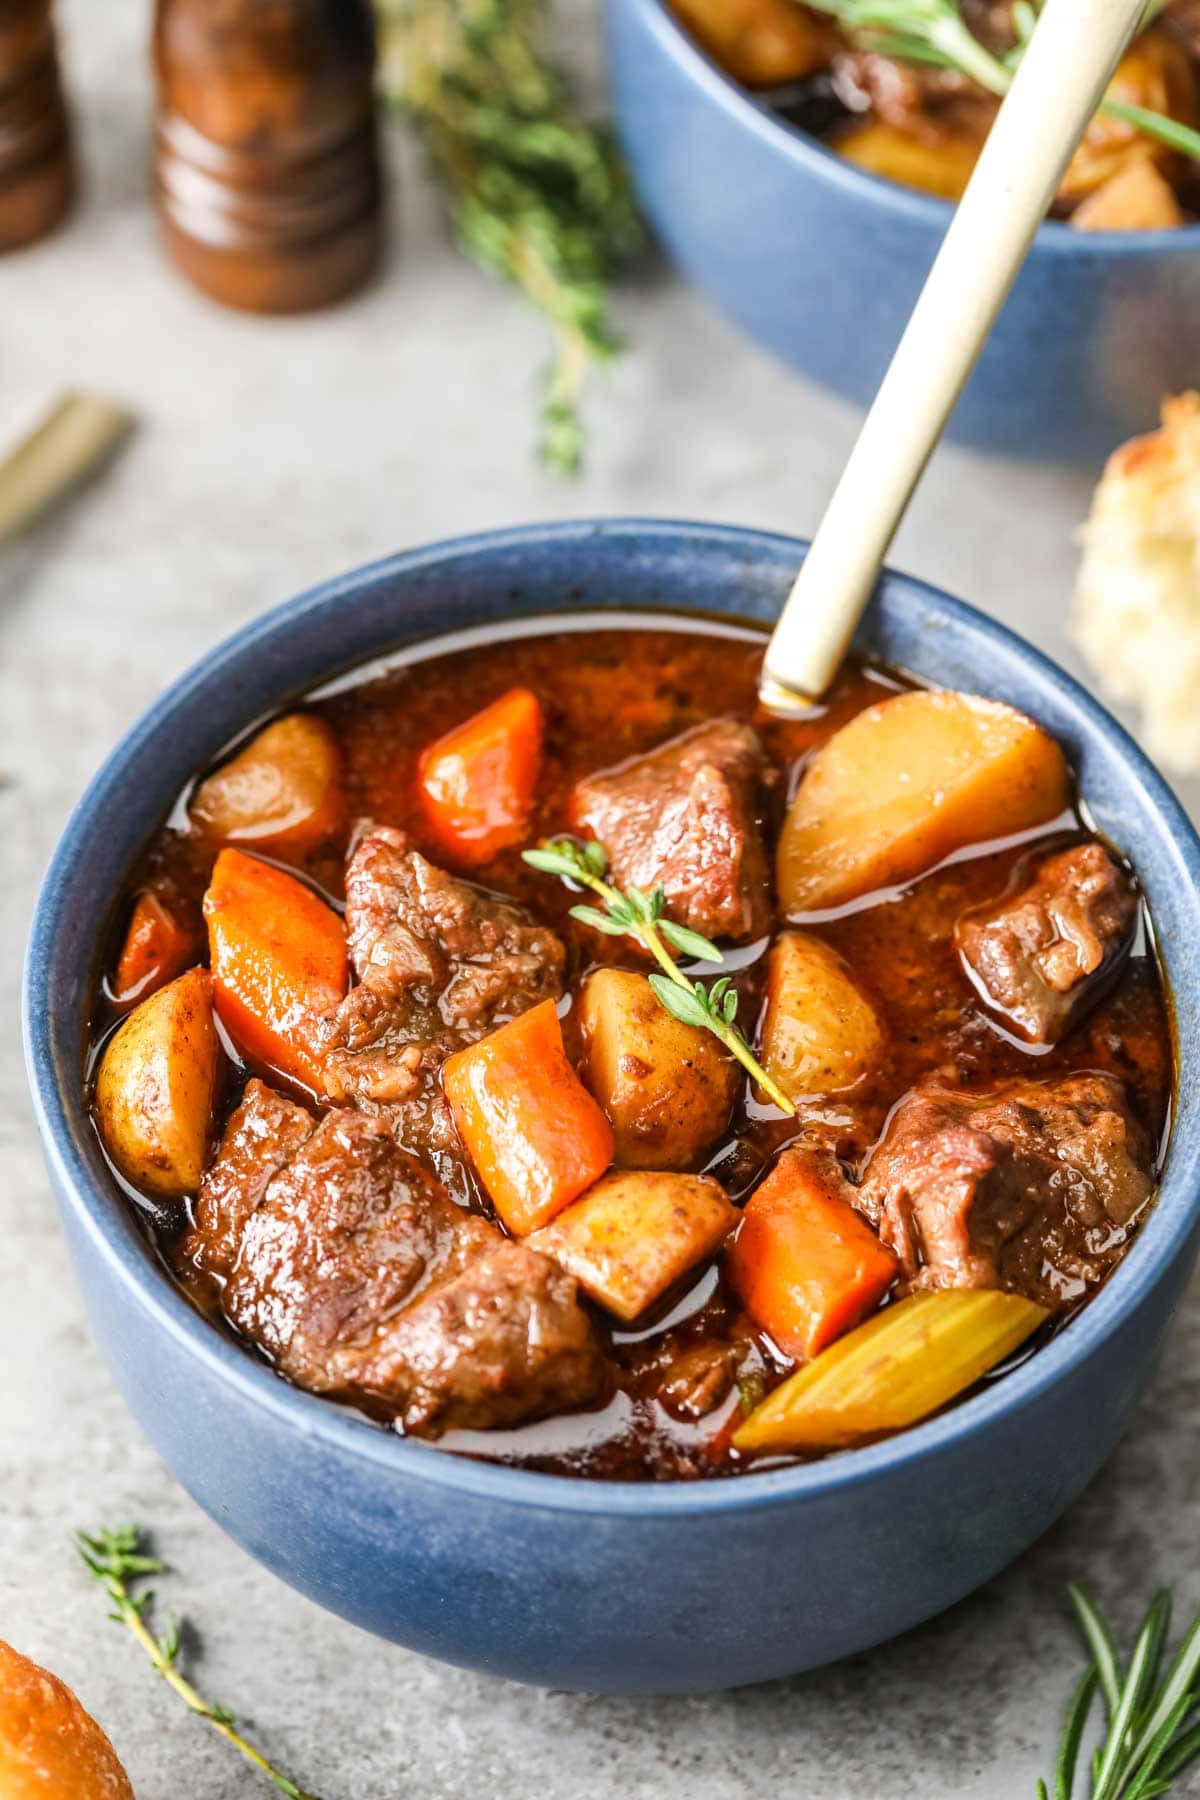 Blue bowl of beef stew with chunks of beef, carrots, and potatoes.